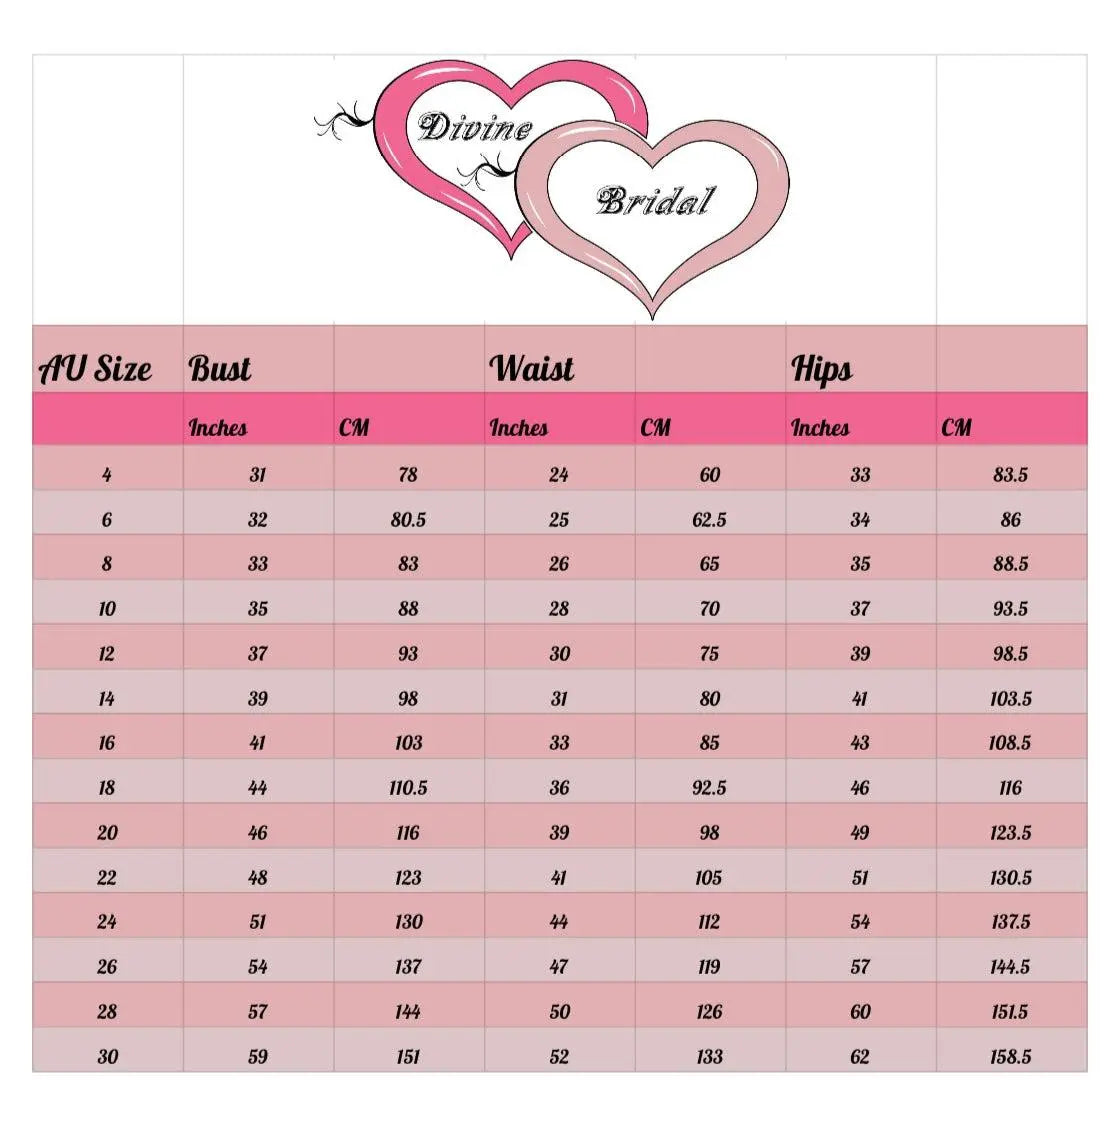 Hazel Bridal Gown Size Chart: Detailed size chart displaying measurements for sizes 4 to 30, ensuring the perfect fit for every bride.